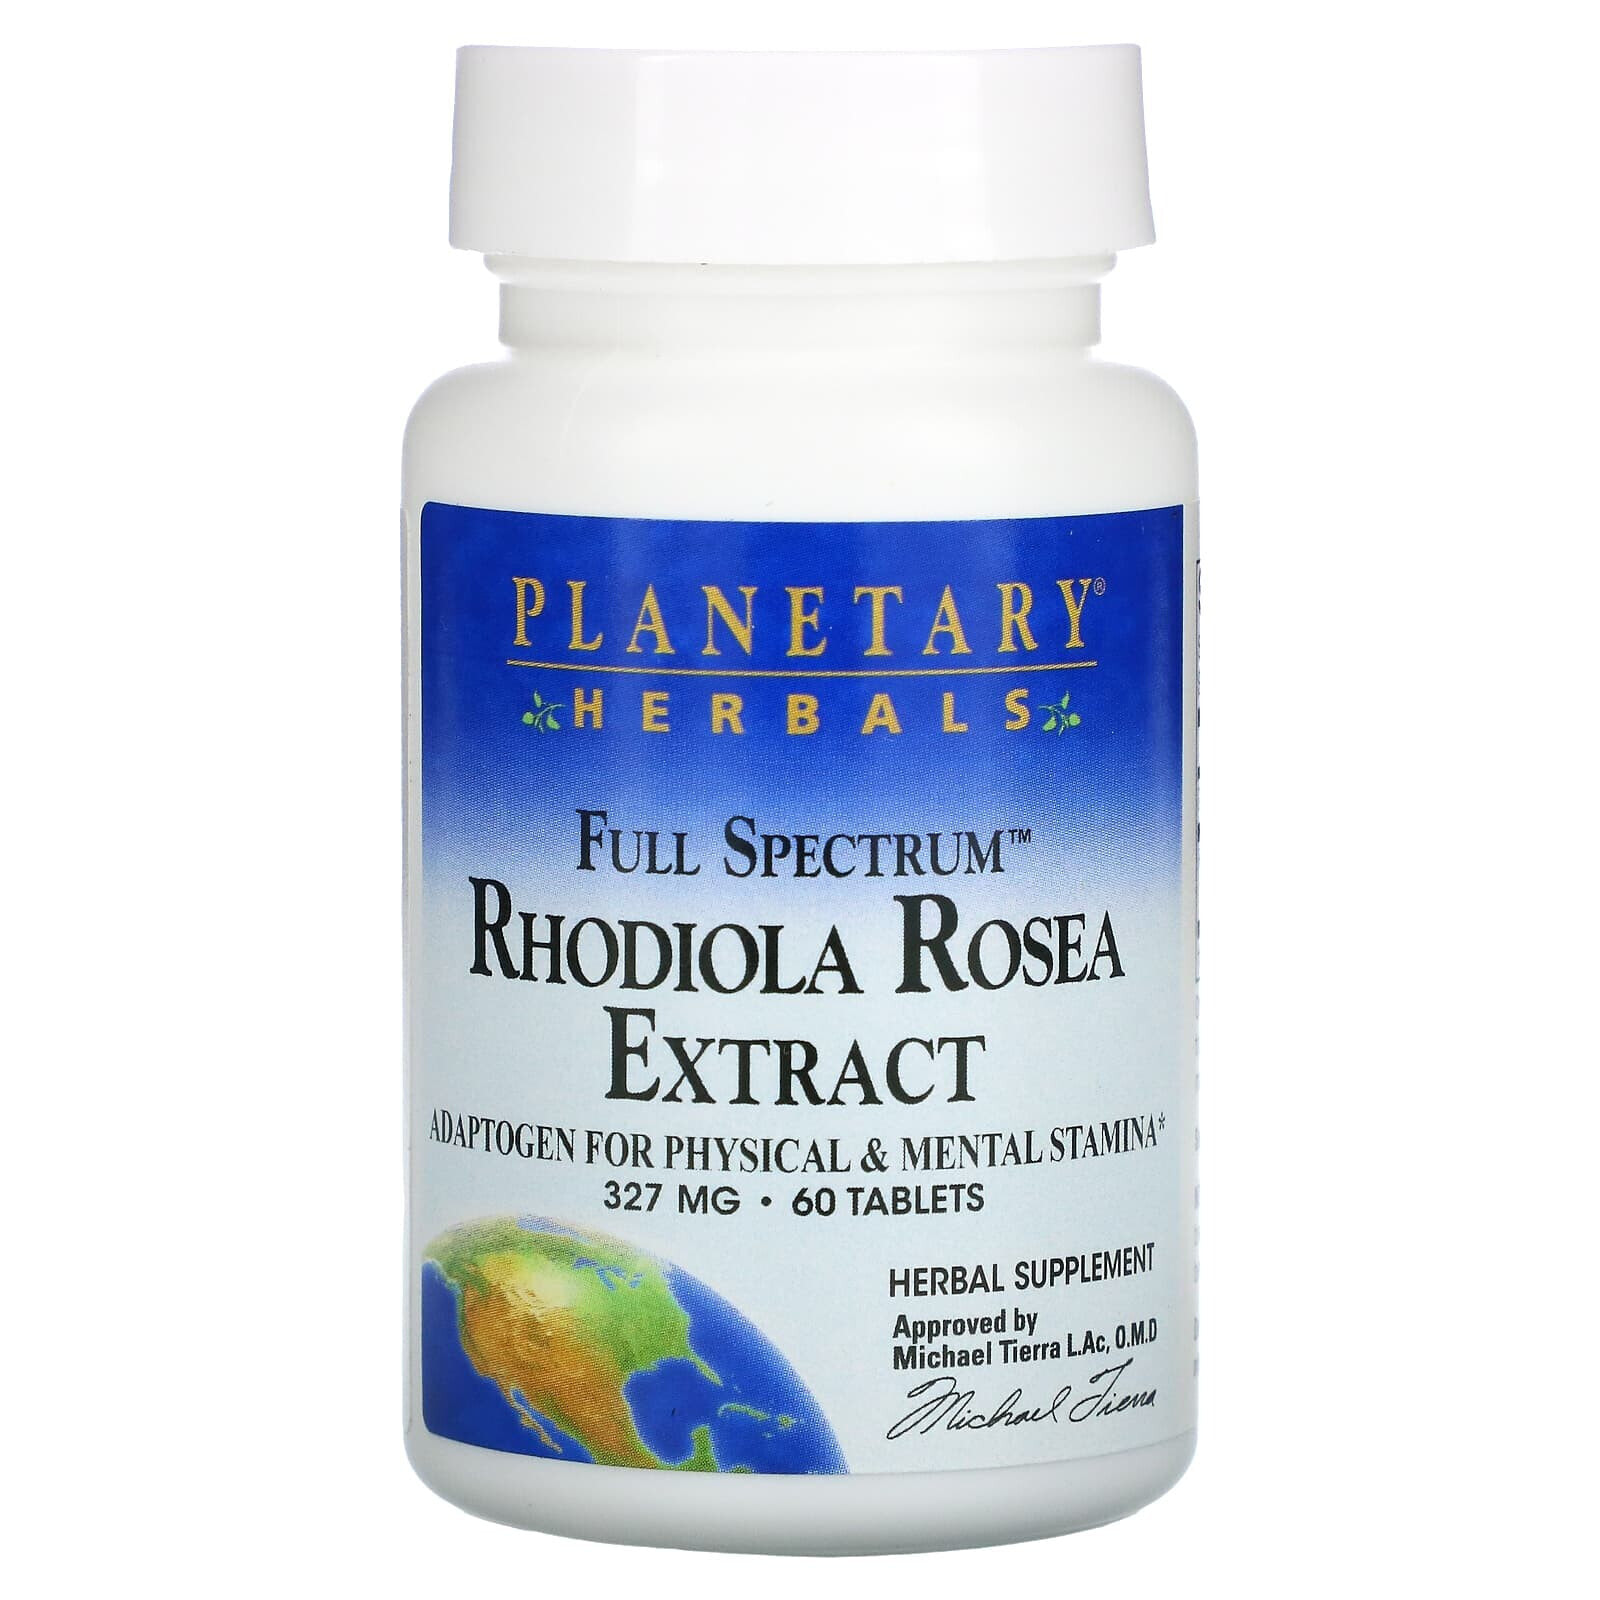 Rhodiola Rosea Extract, Full Spectrum, 327 mg, 60 Tablets